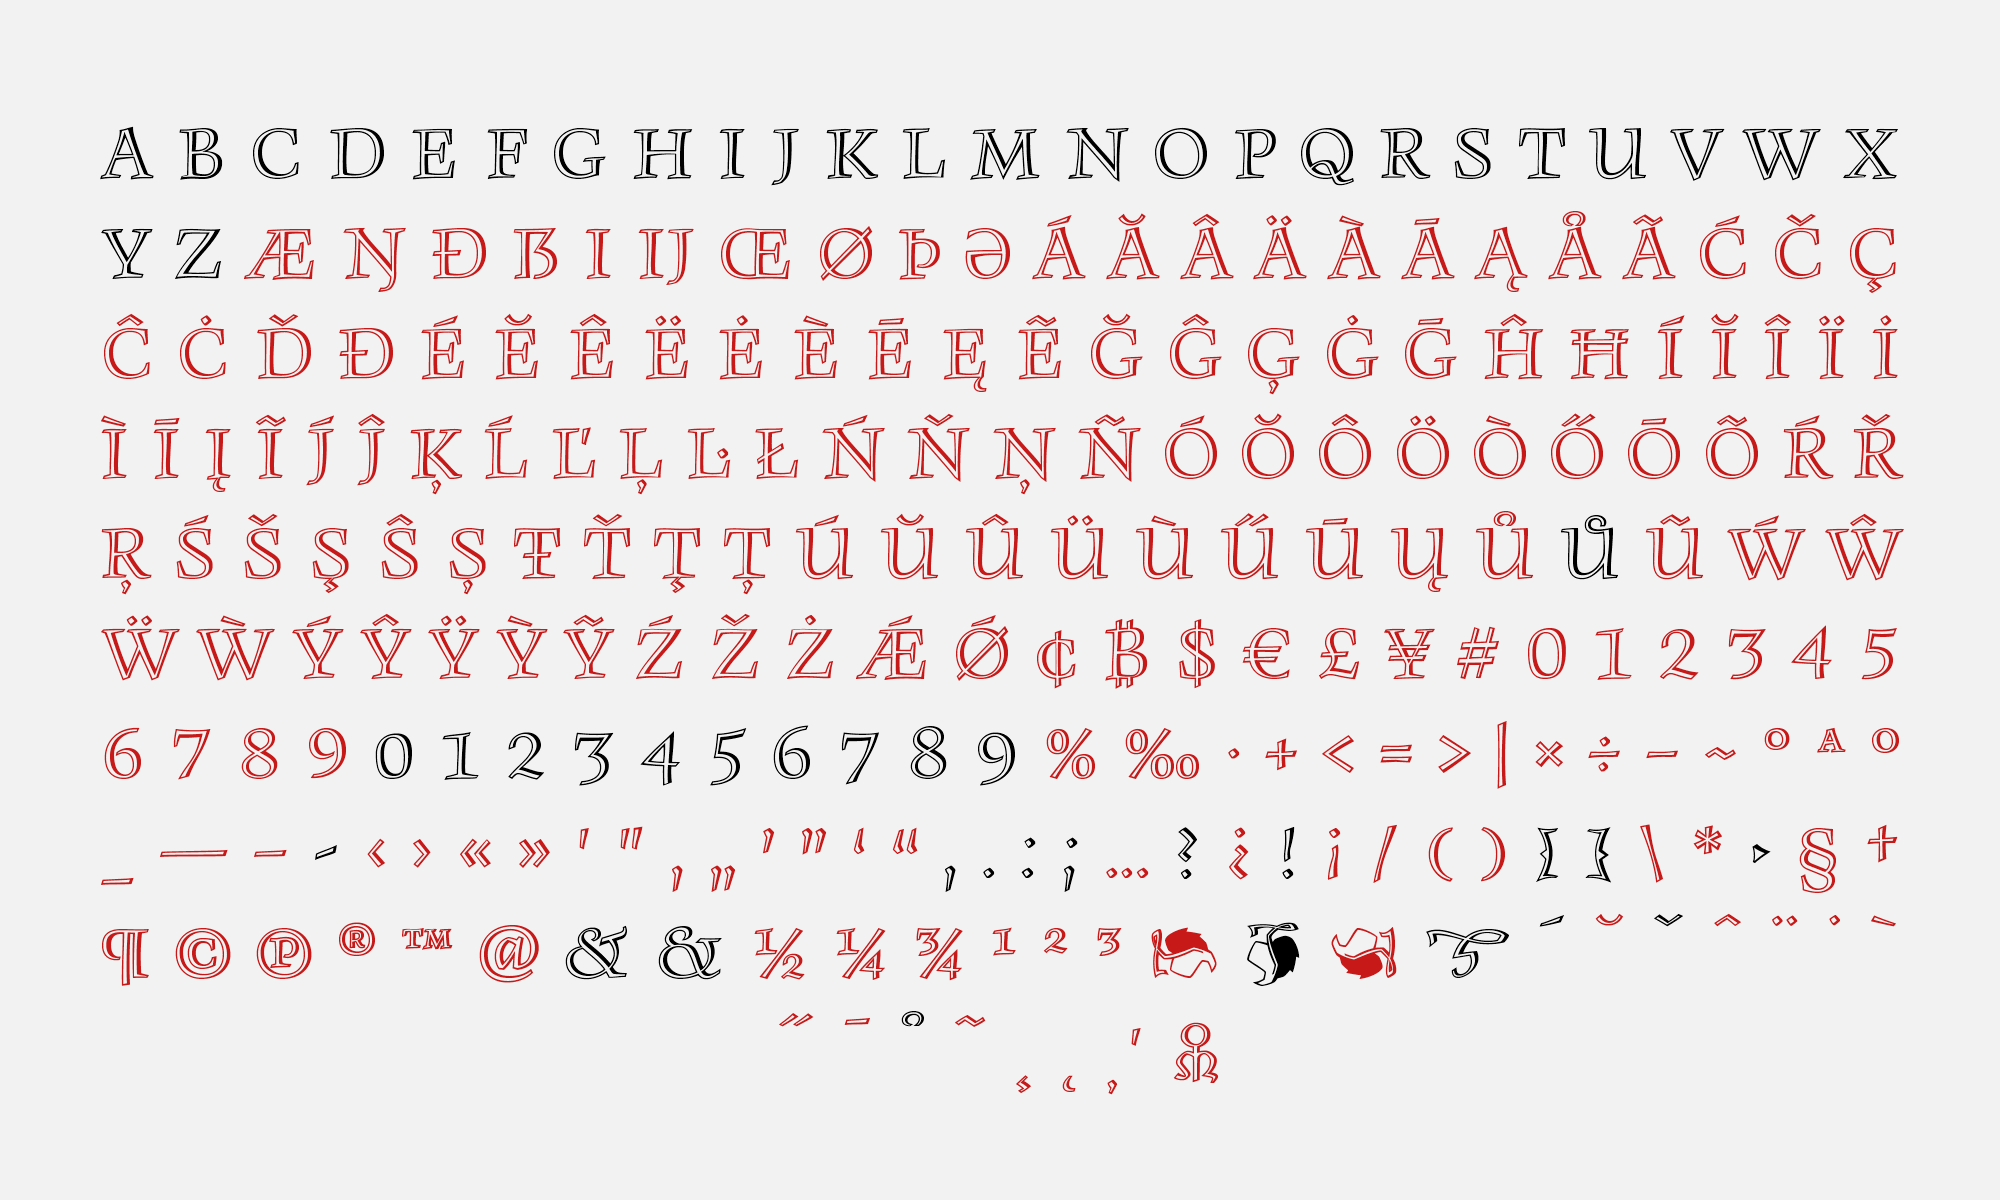 The complete character set of the BC Monument typeface. The ones marked in black are the original characters designed by Oldřich Menhart. The red characters are the ones that have been newly created.